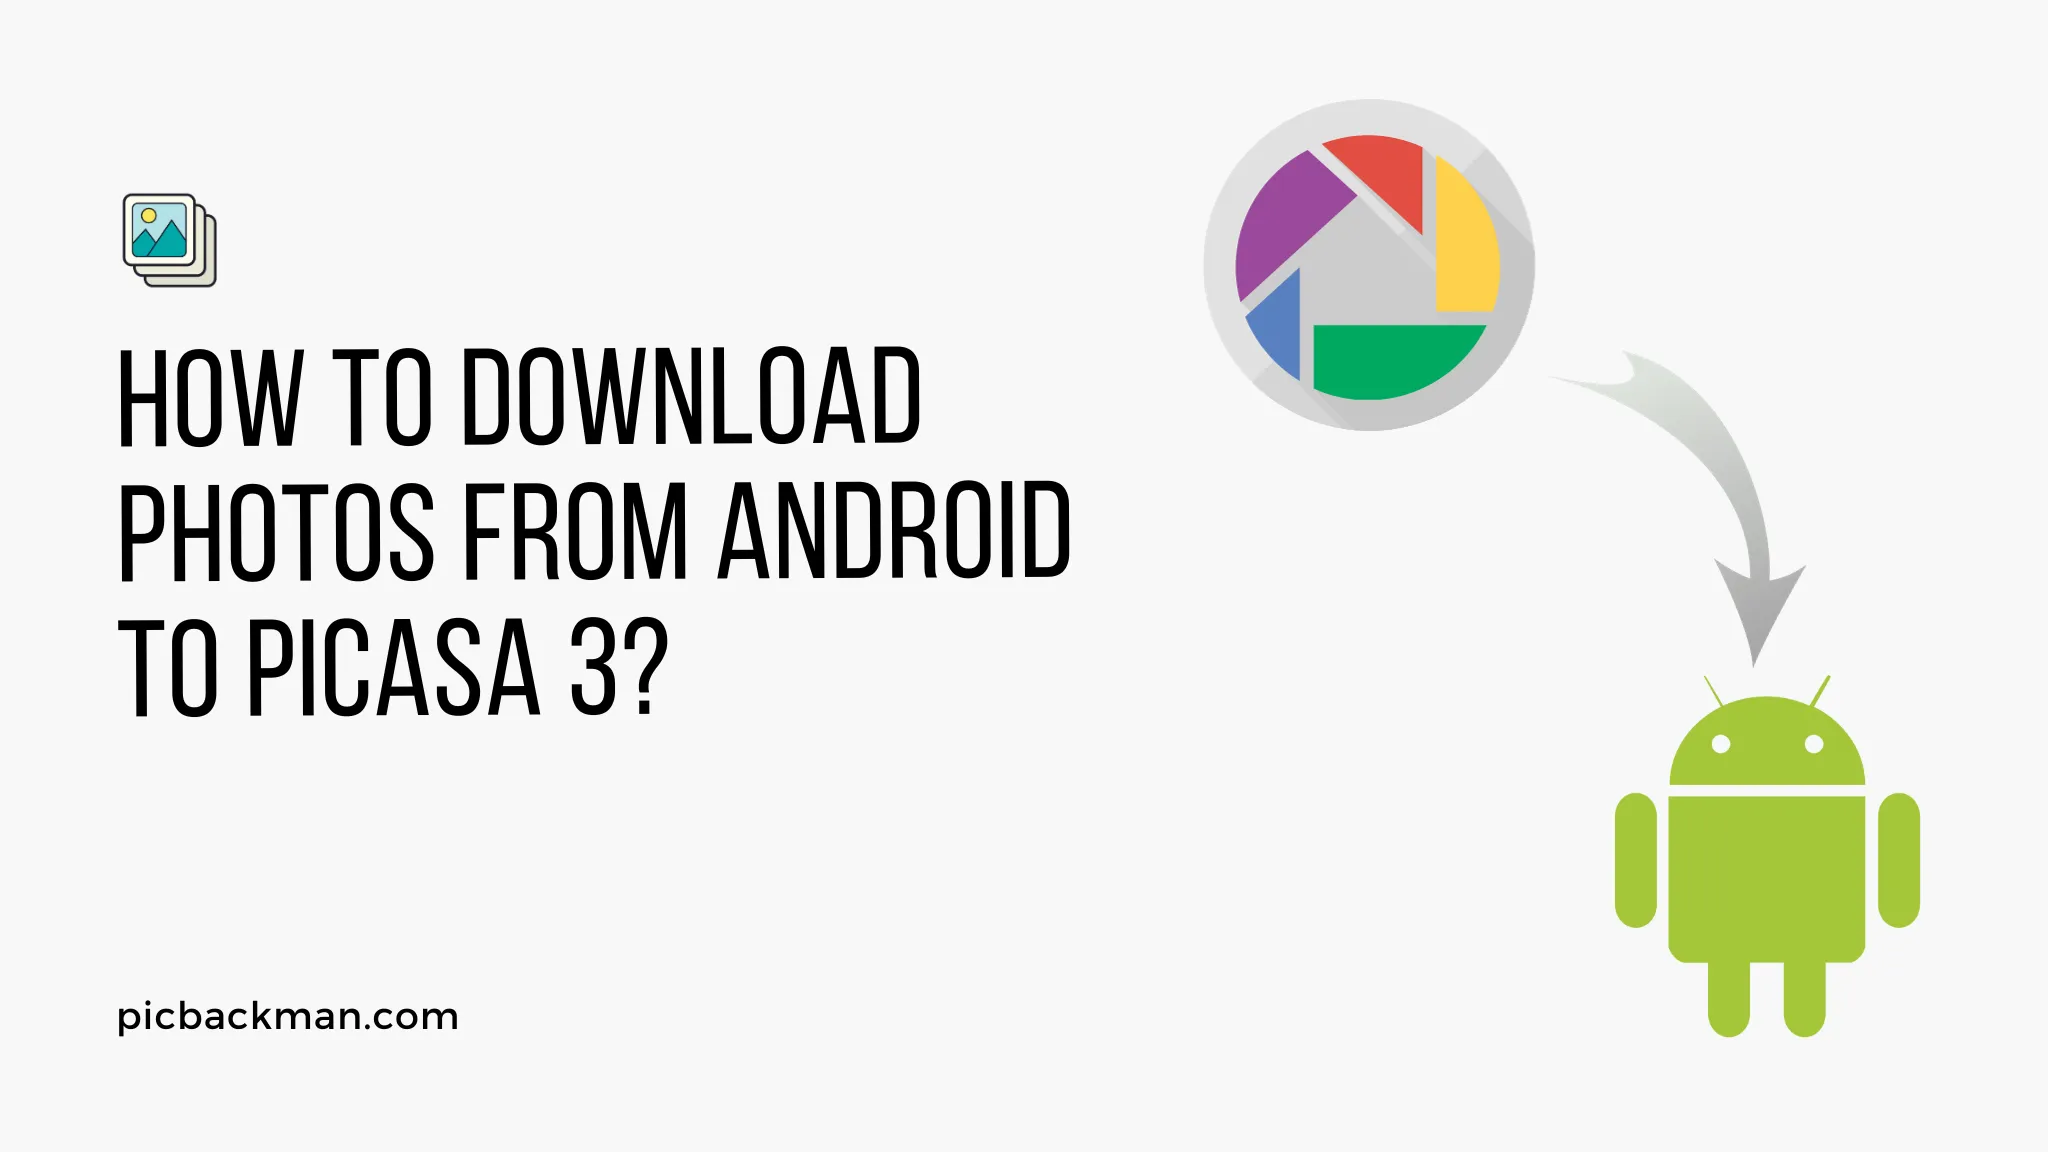 How to Download Photos from Android to Picasa 3?